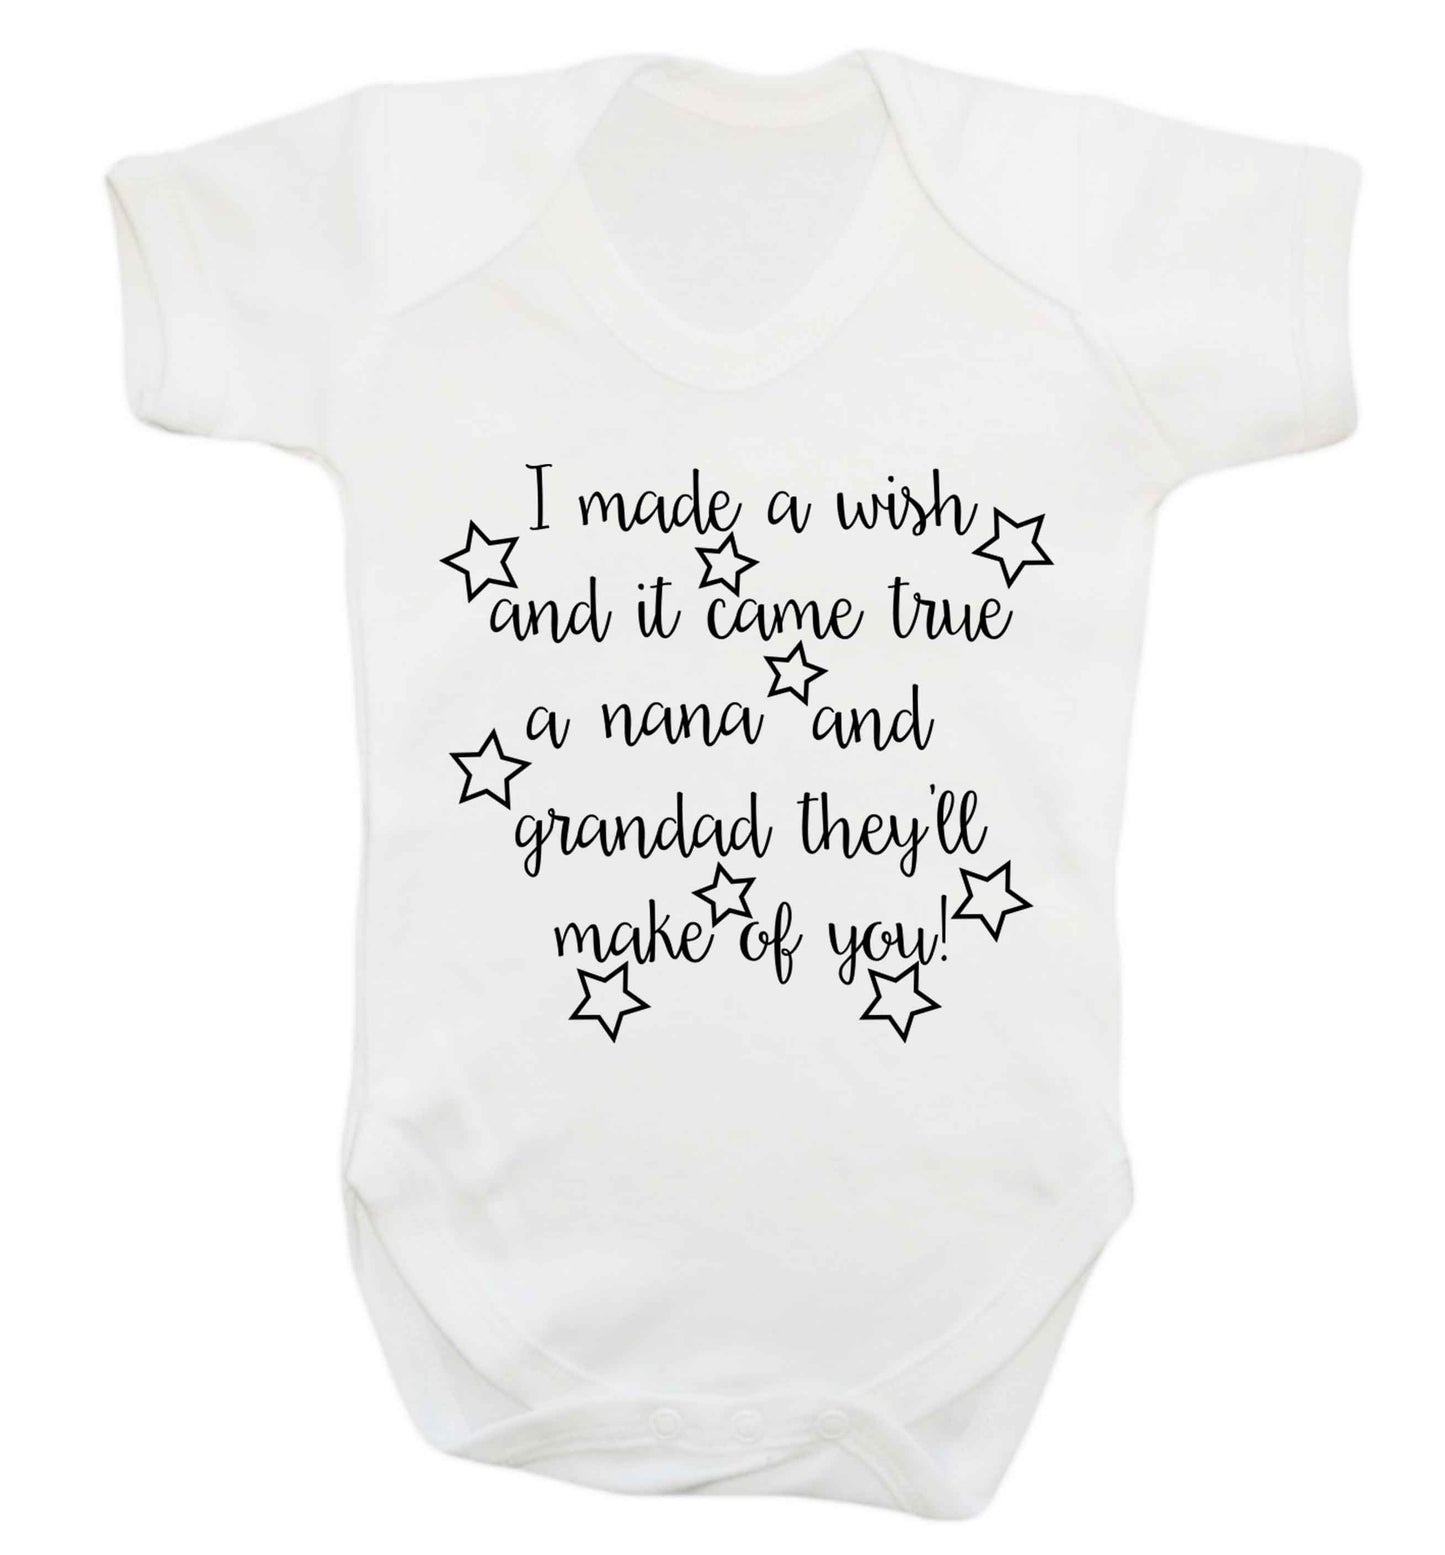 I made a wish and it came true a nana and grandad they'll make of you! Baby Vest white 18-24 months